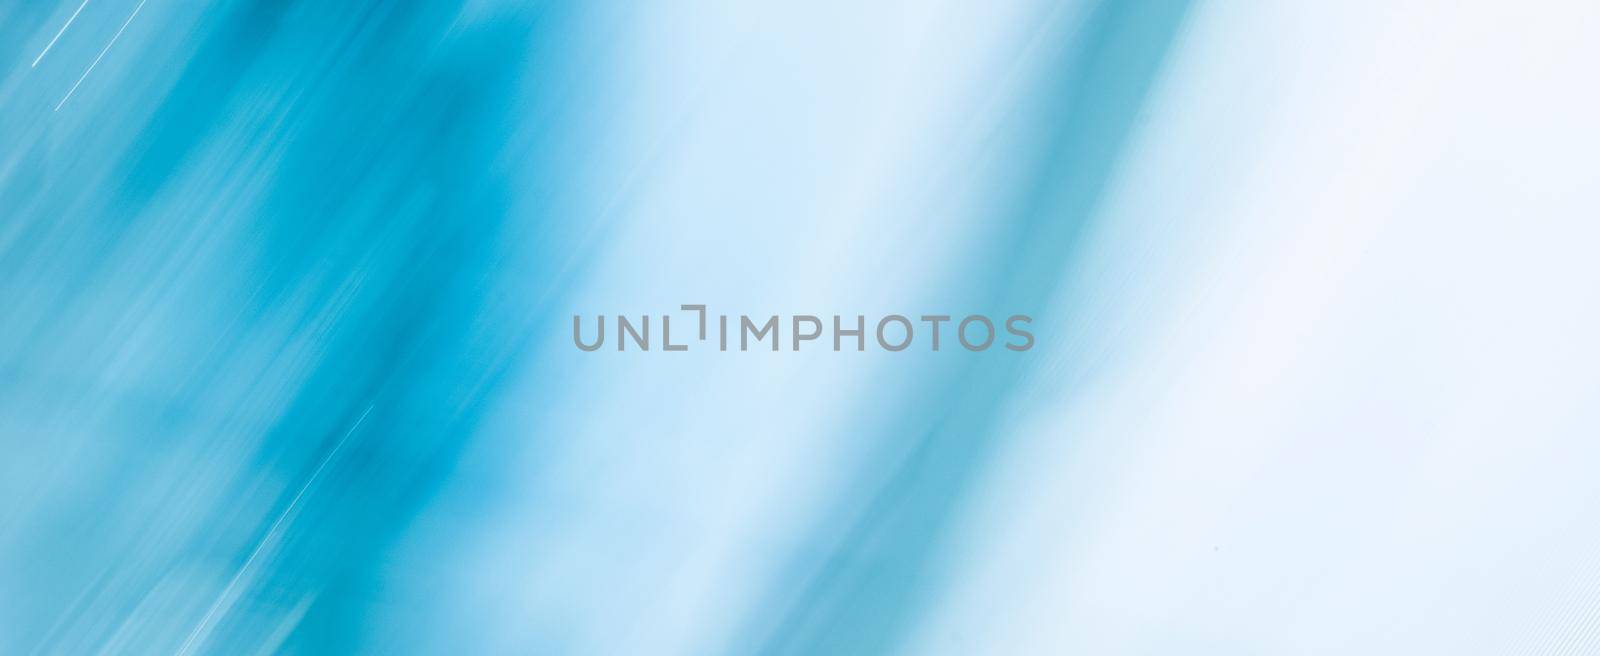 Abstract art, modern tech backgrounds and futuristic concept - Contemporary abstract art, blue colors